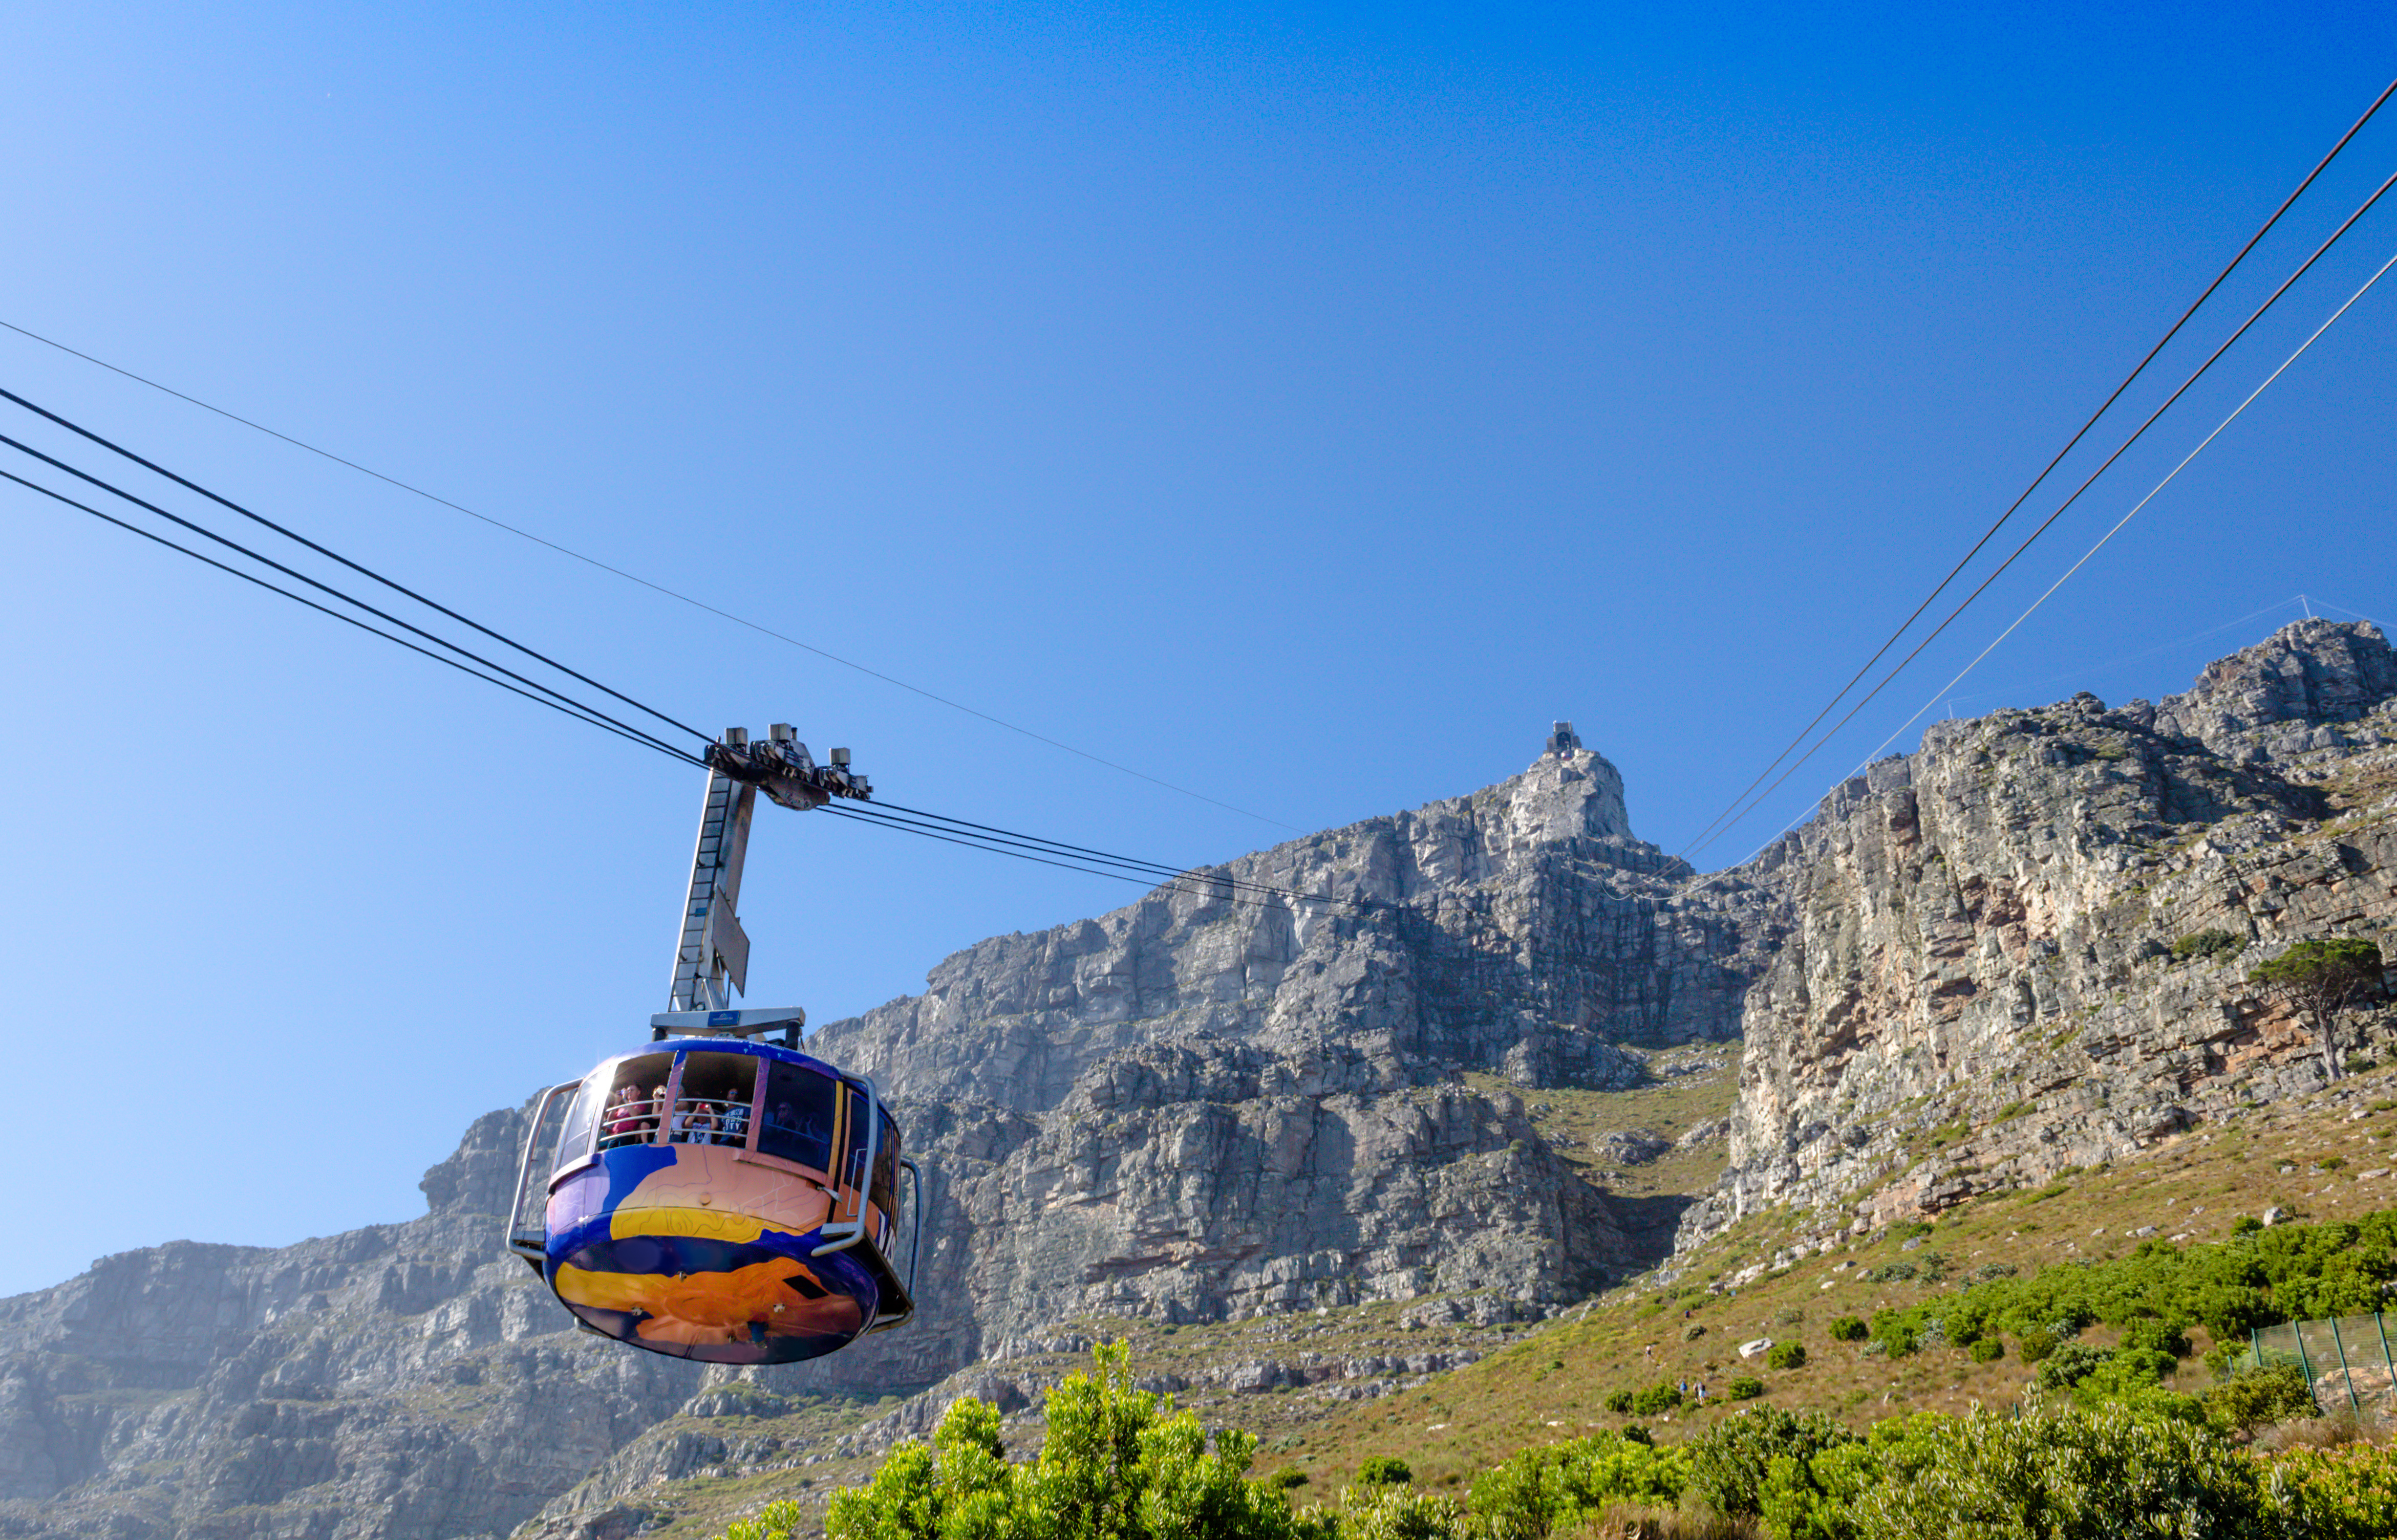 Cableway and car, Cape Town, South Africa